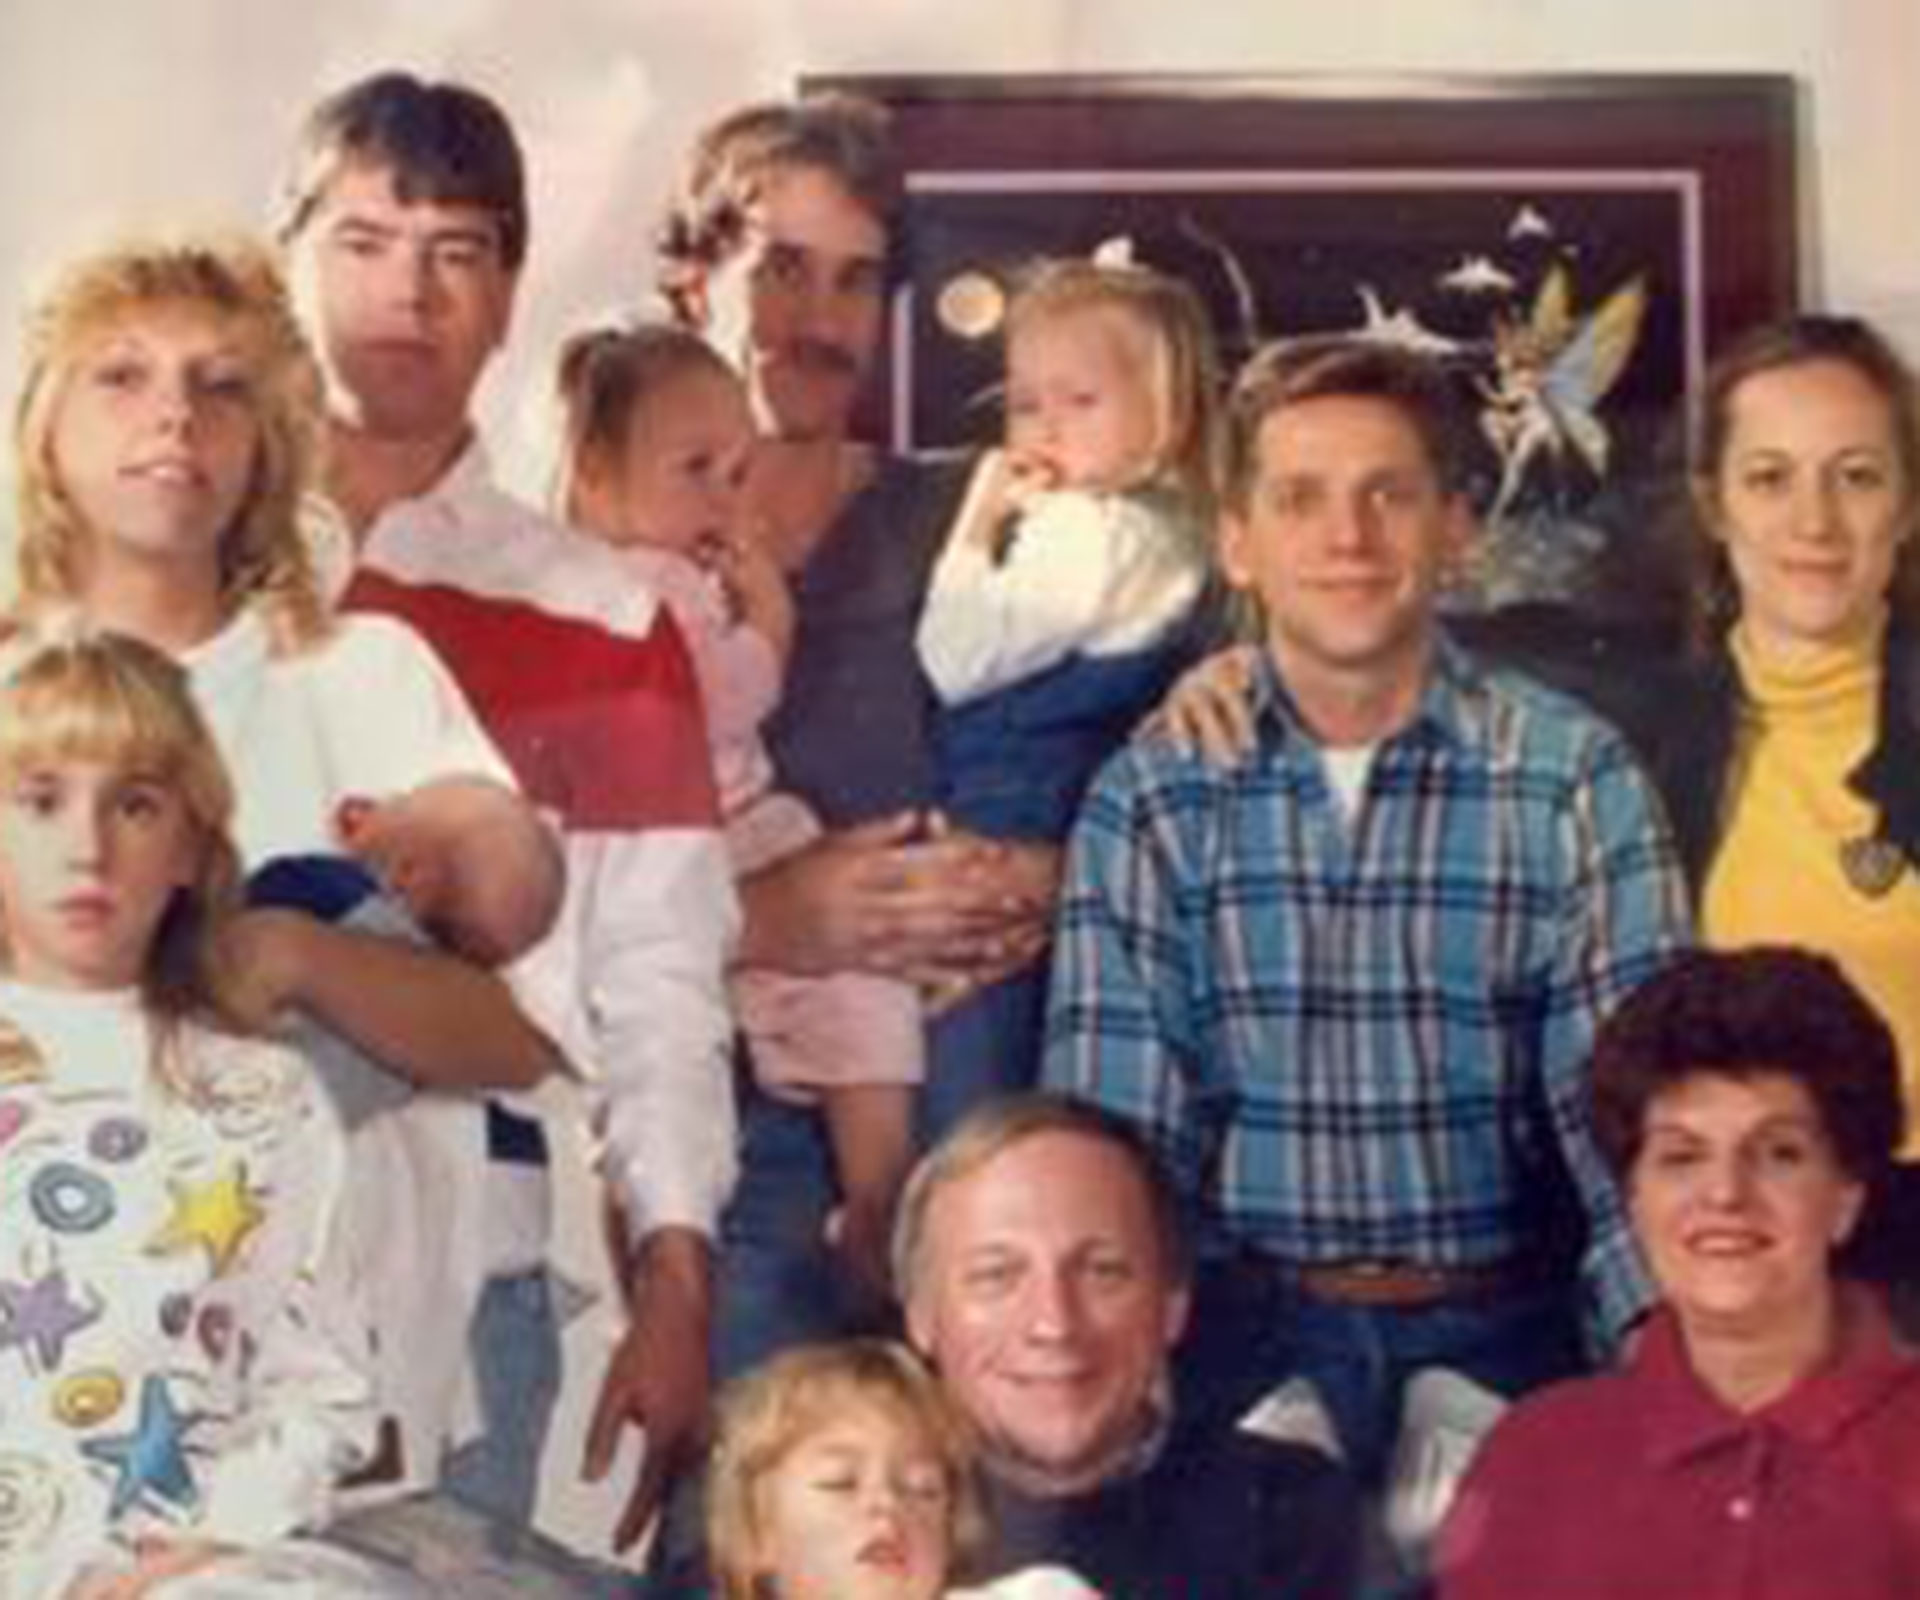 The chilling mystery behind this family portrait